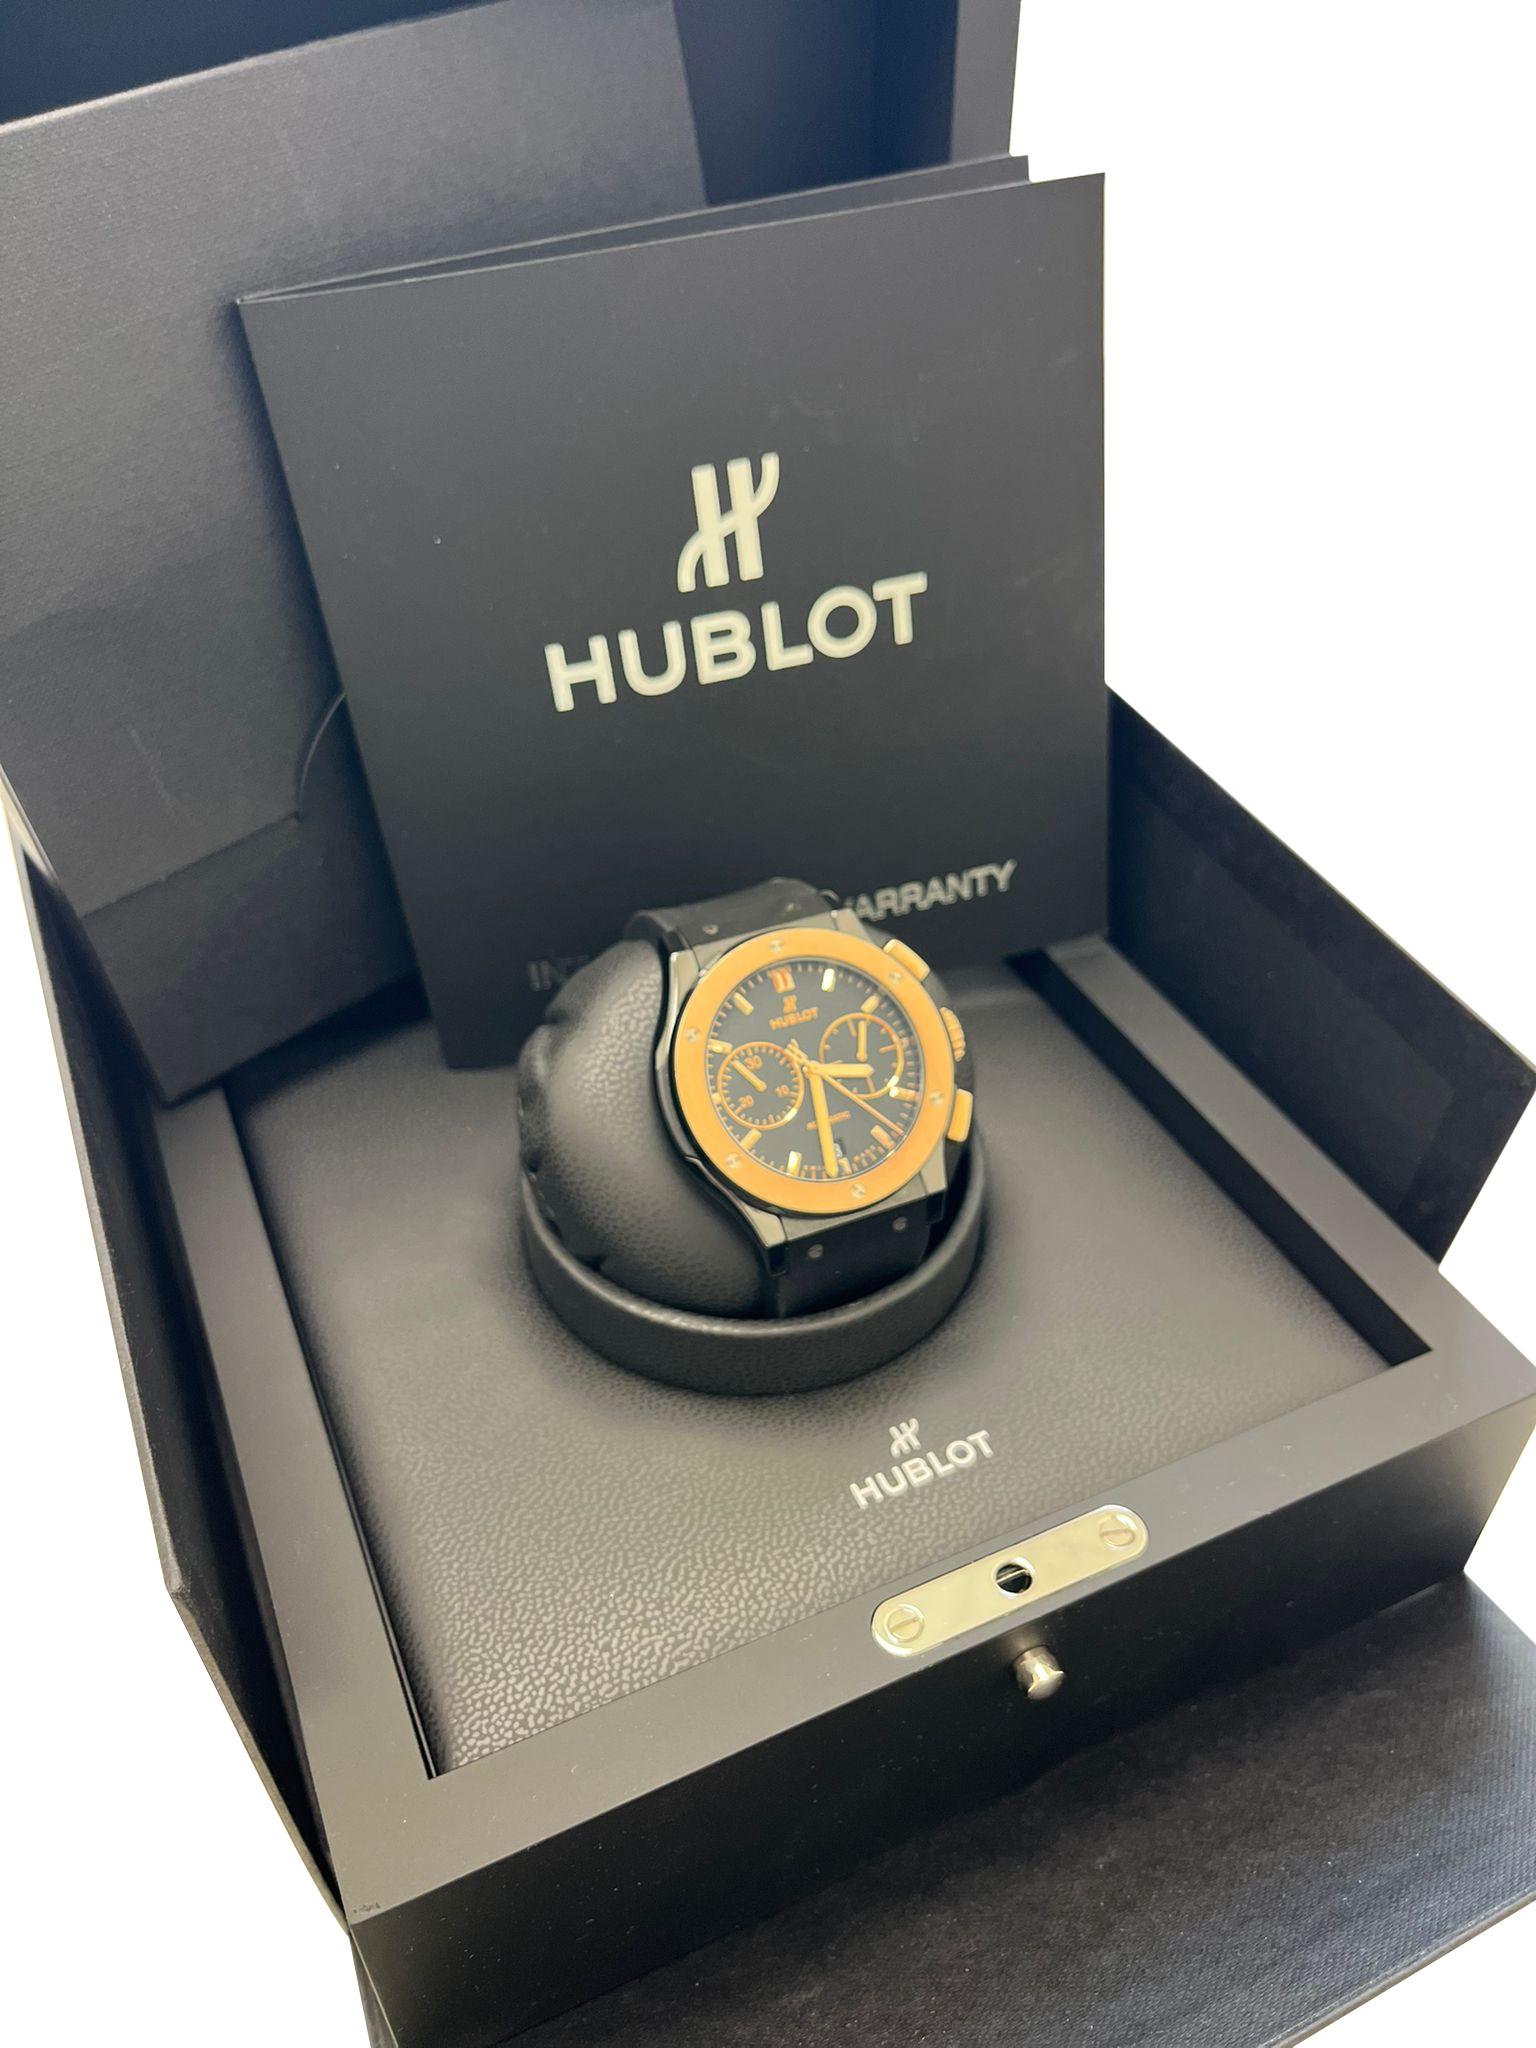 Hublot Classic Fusion Chronograph Ceramic King Gold 45mm Watch 521.CO.1181.RX For Sale 6